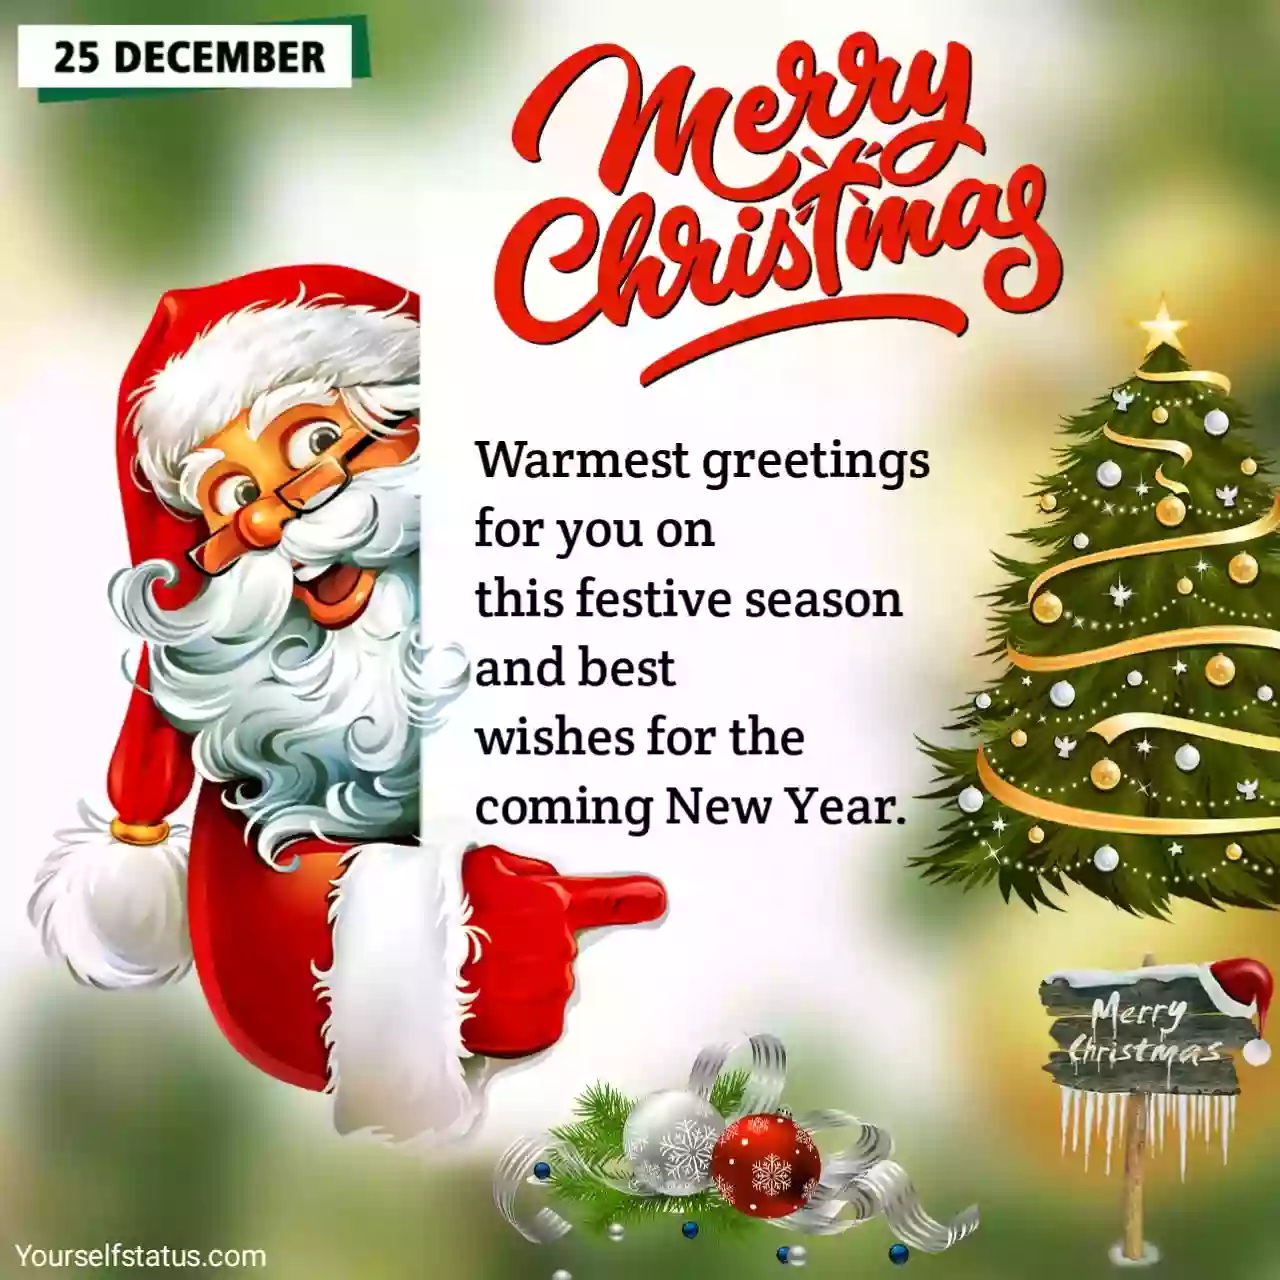 Merry christmas greetings in english